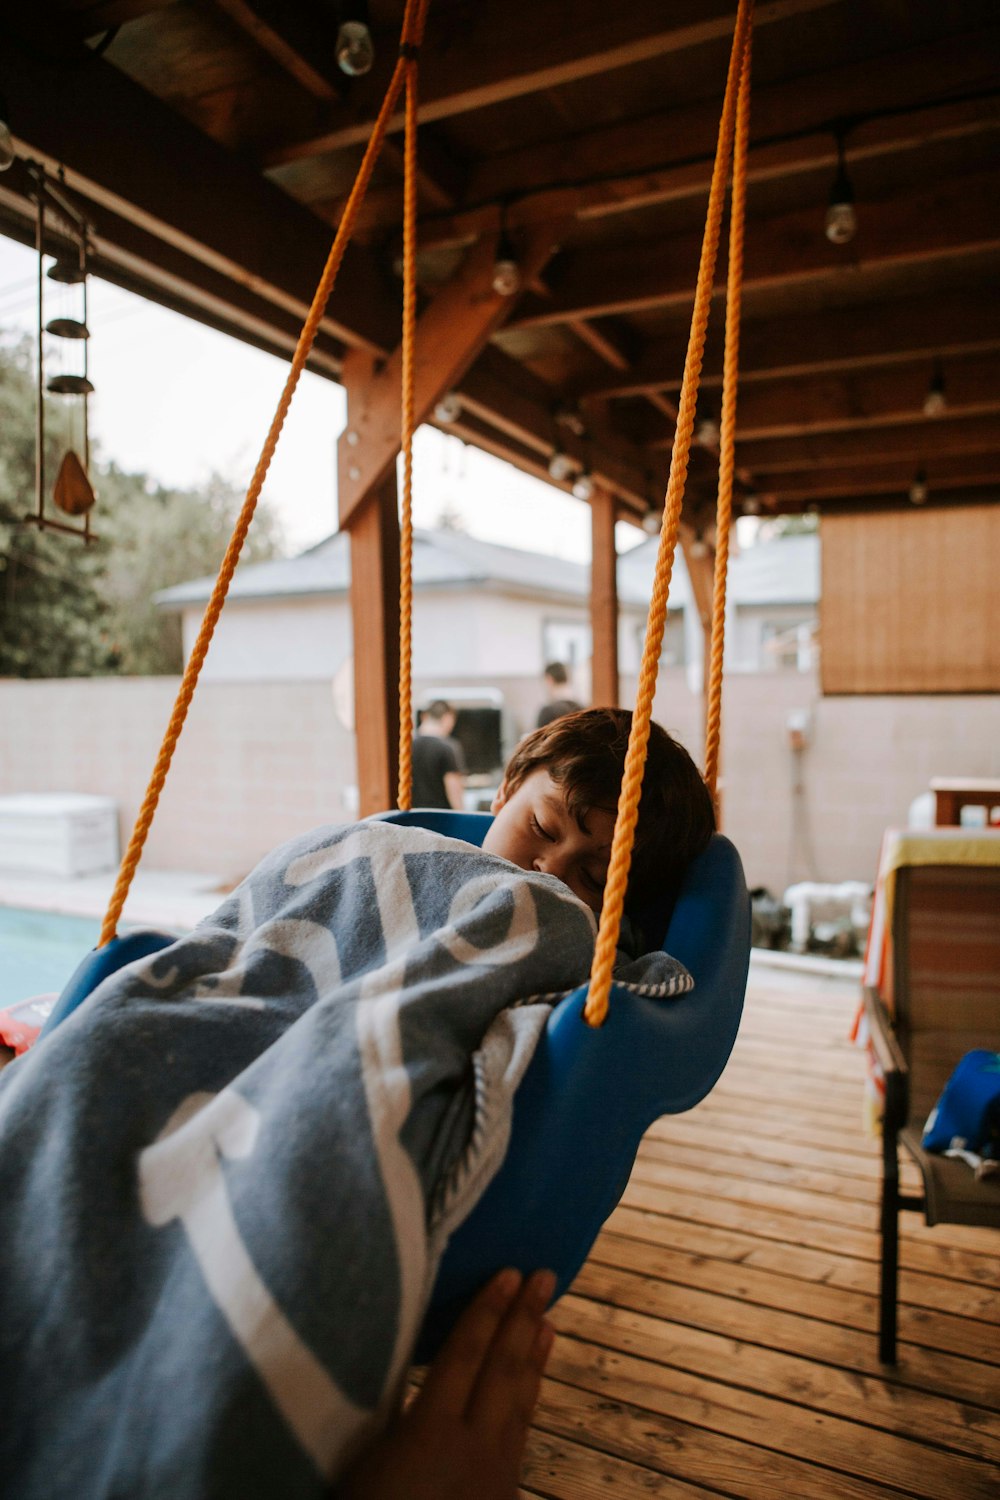 person in blue jacket sitting on swing during daytime